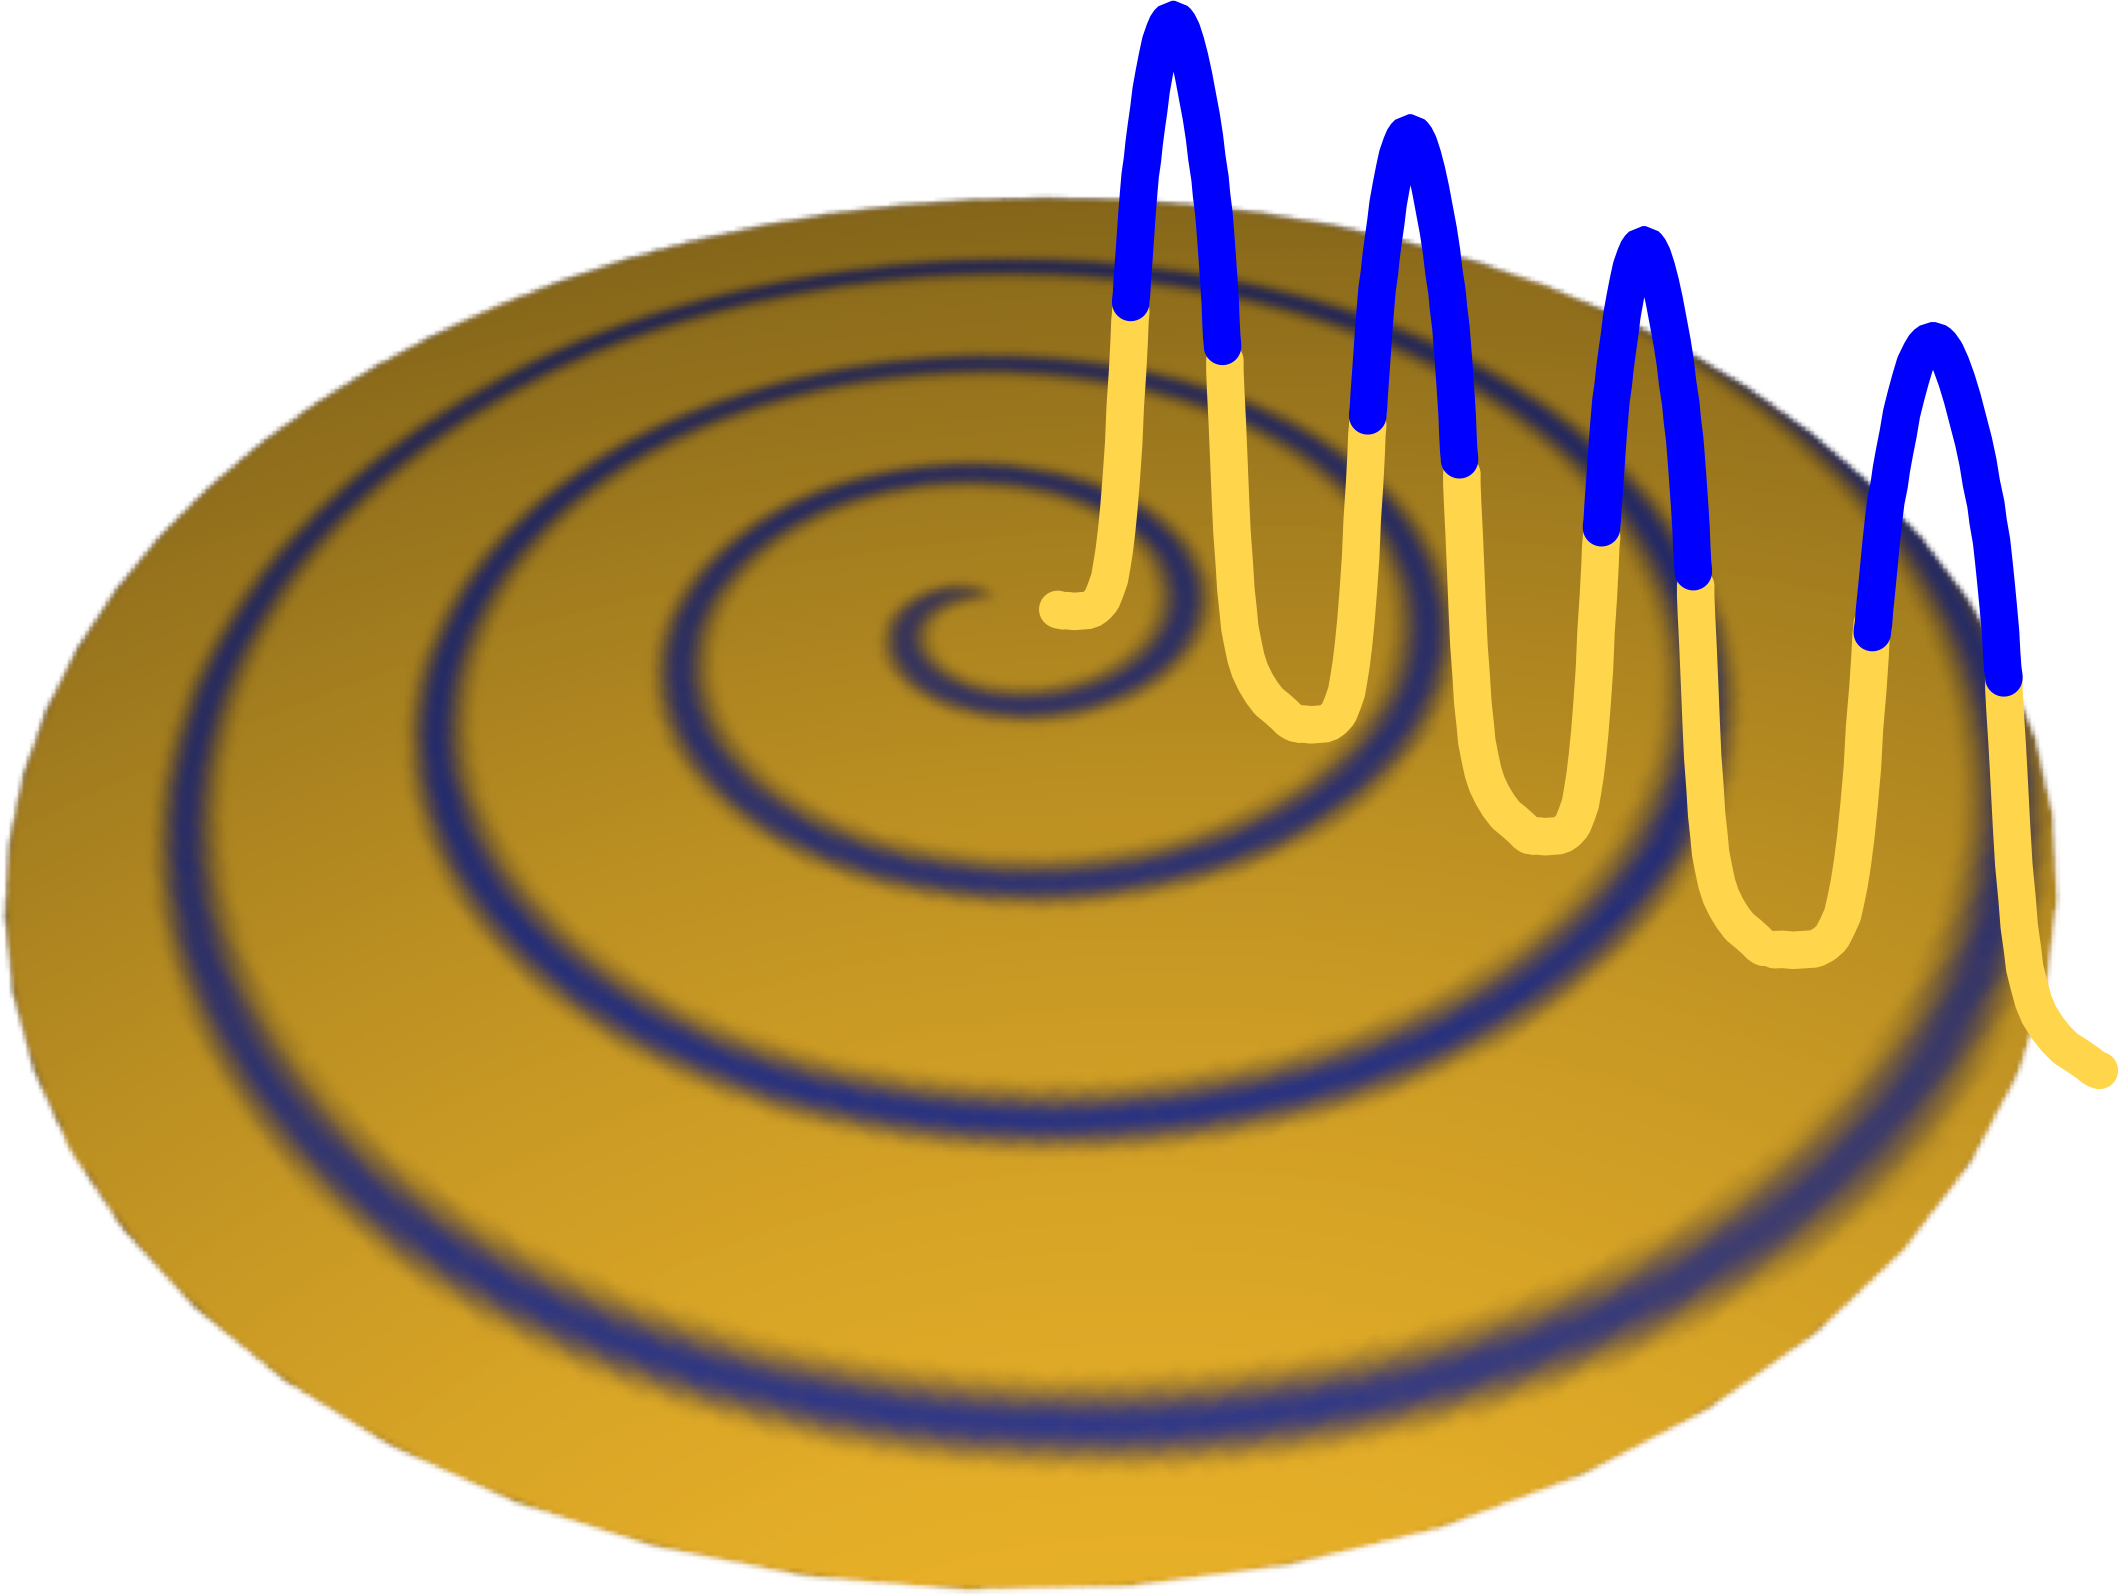 1d Pulse Spiral Wave Oscillon - Linear And Nonlinear Waves (2119x1595)